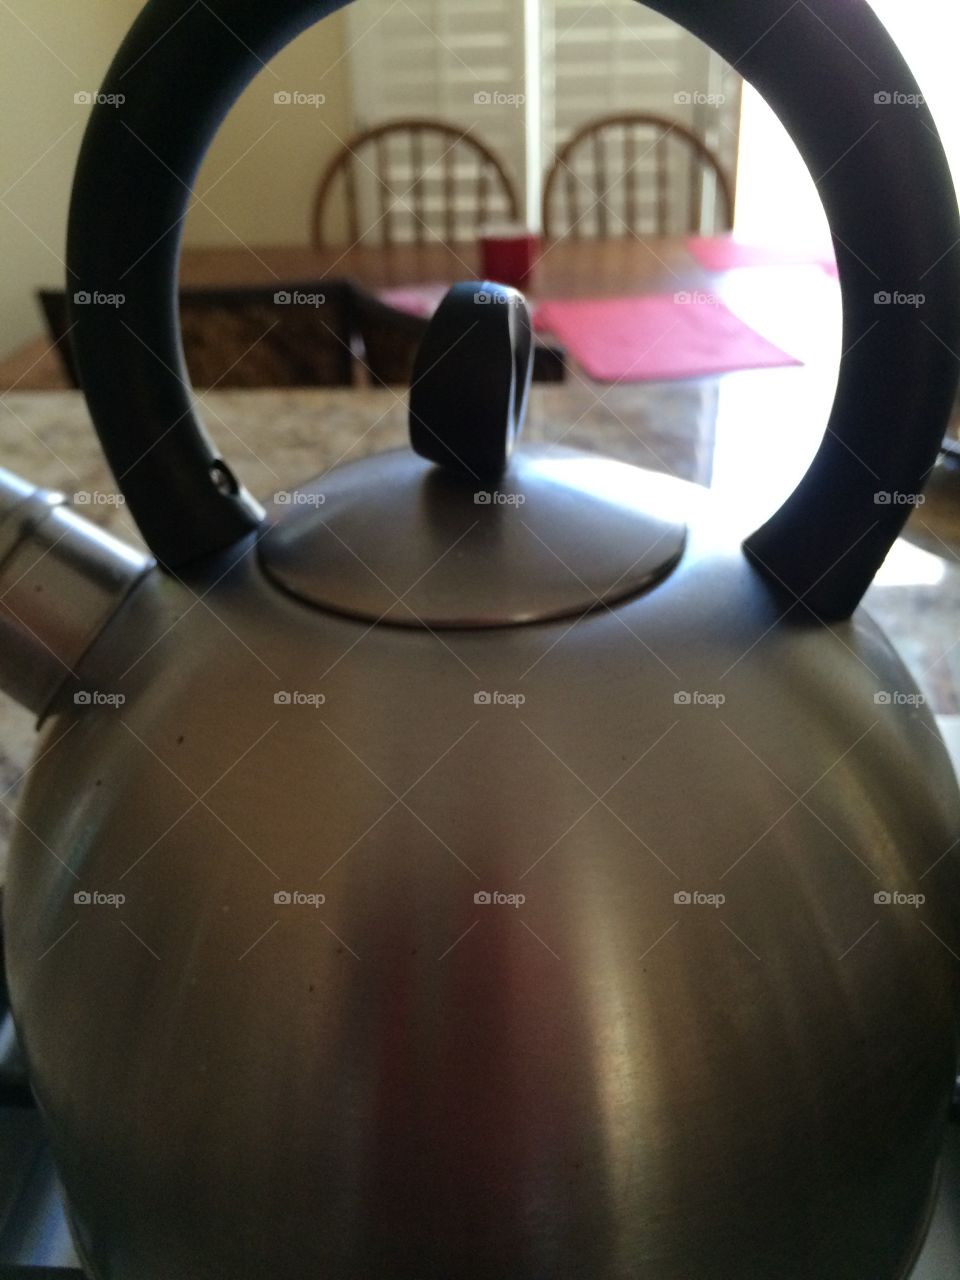 Kettle with a smile